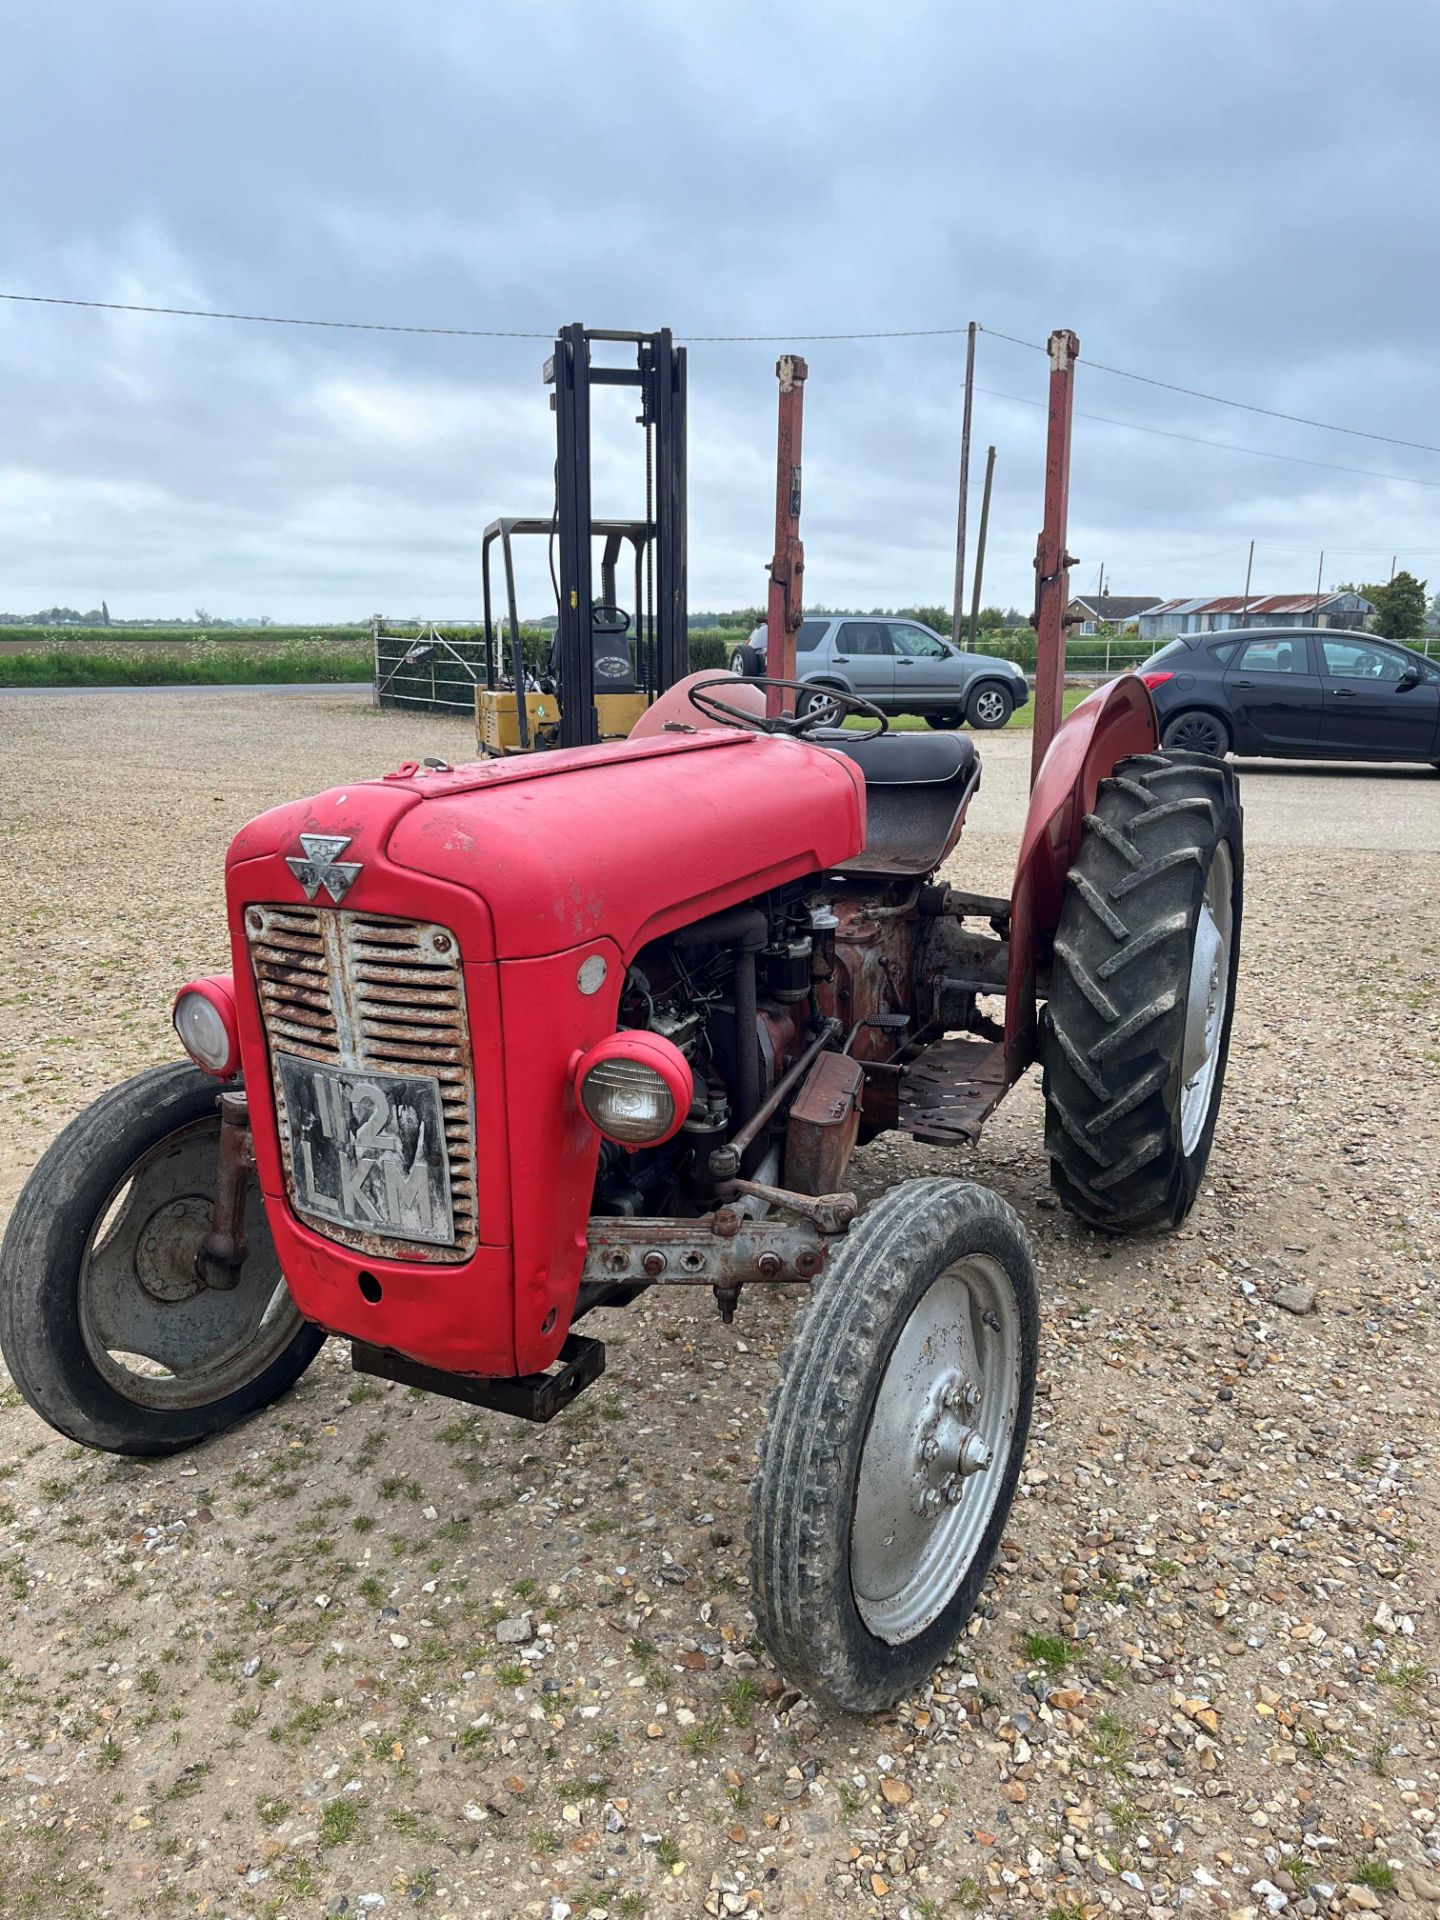 1960 Massey Ferguson 35 orchard tractor, 8000hrs with underslung exhaust system